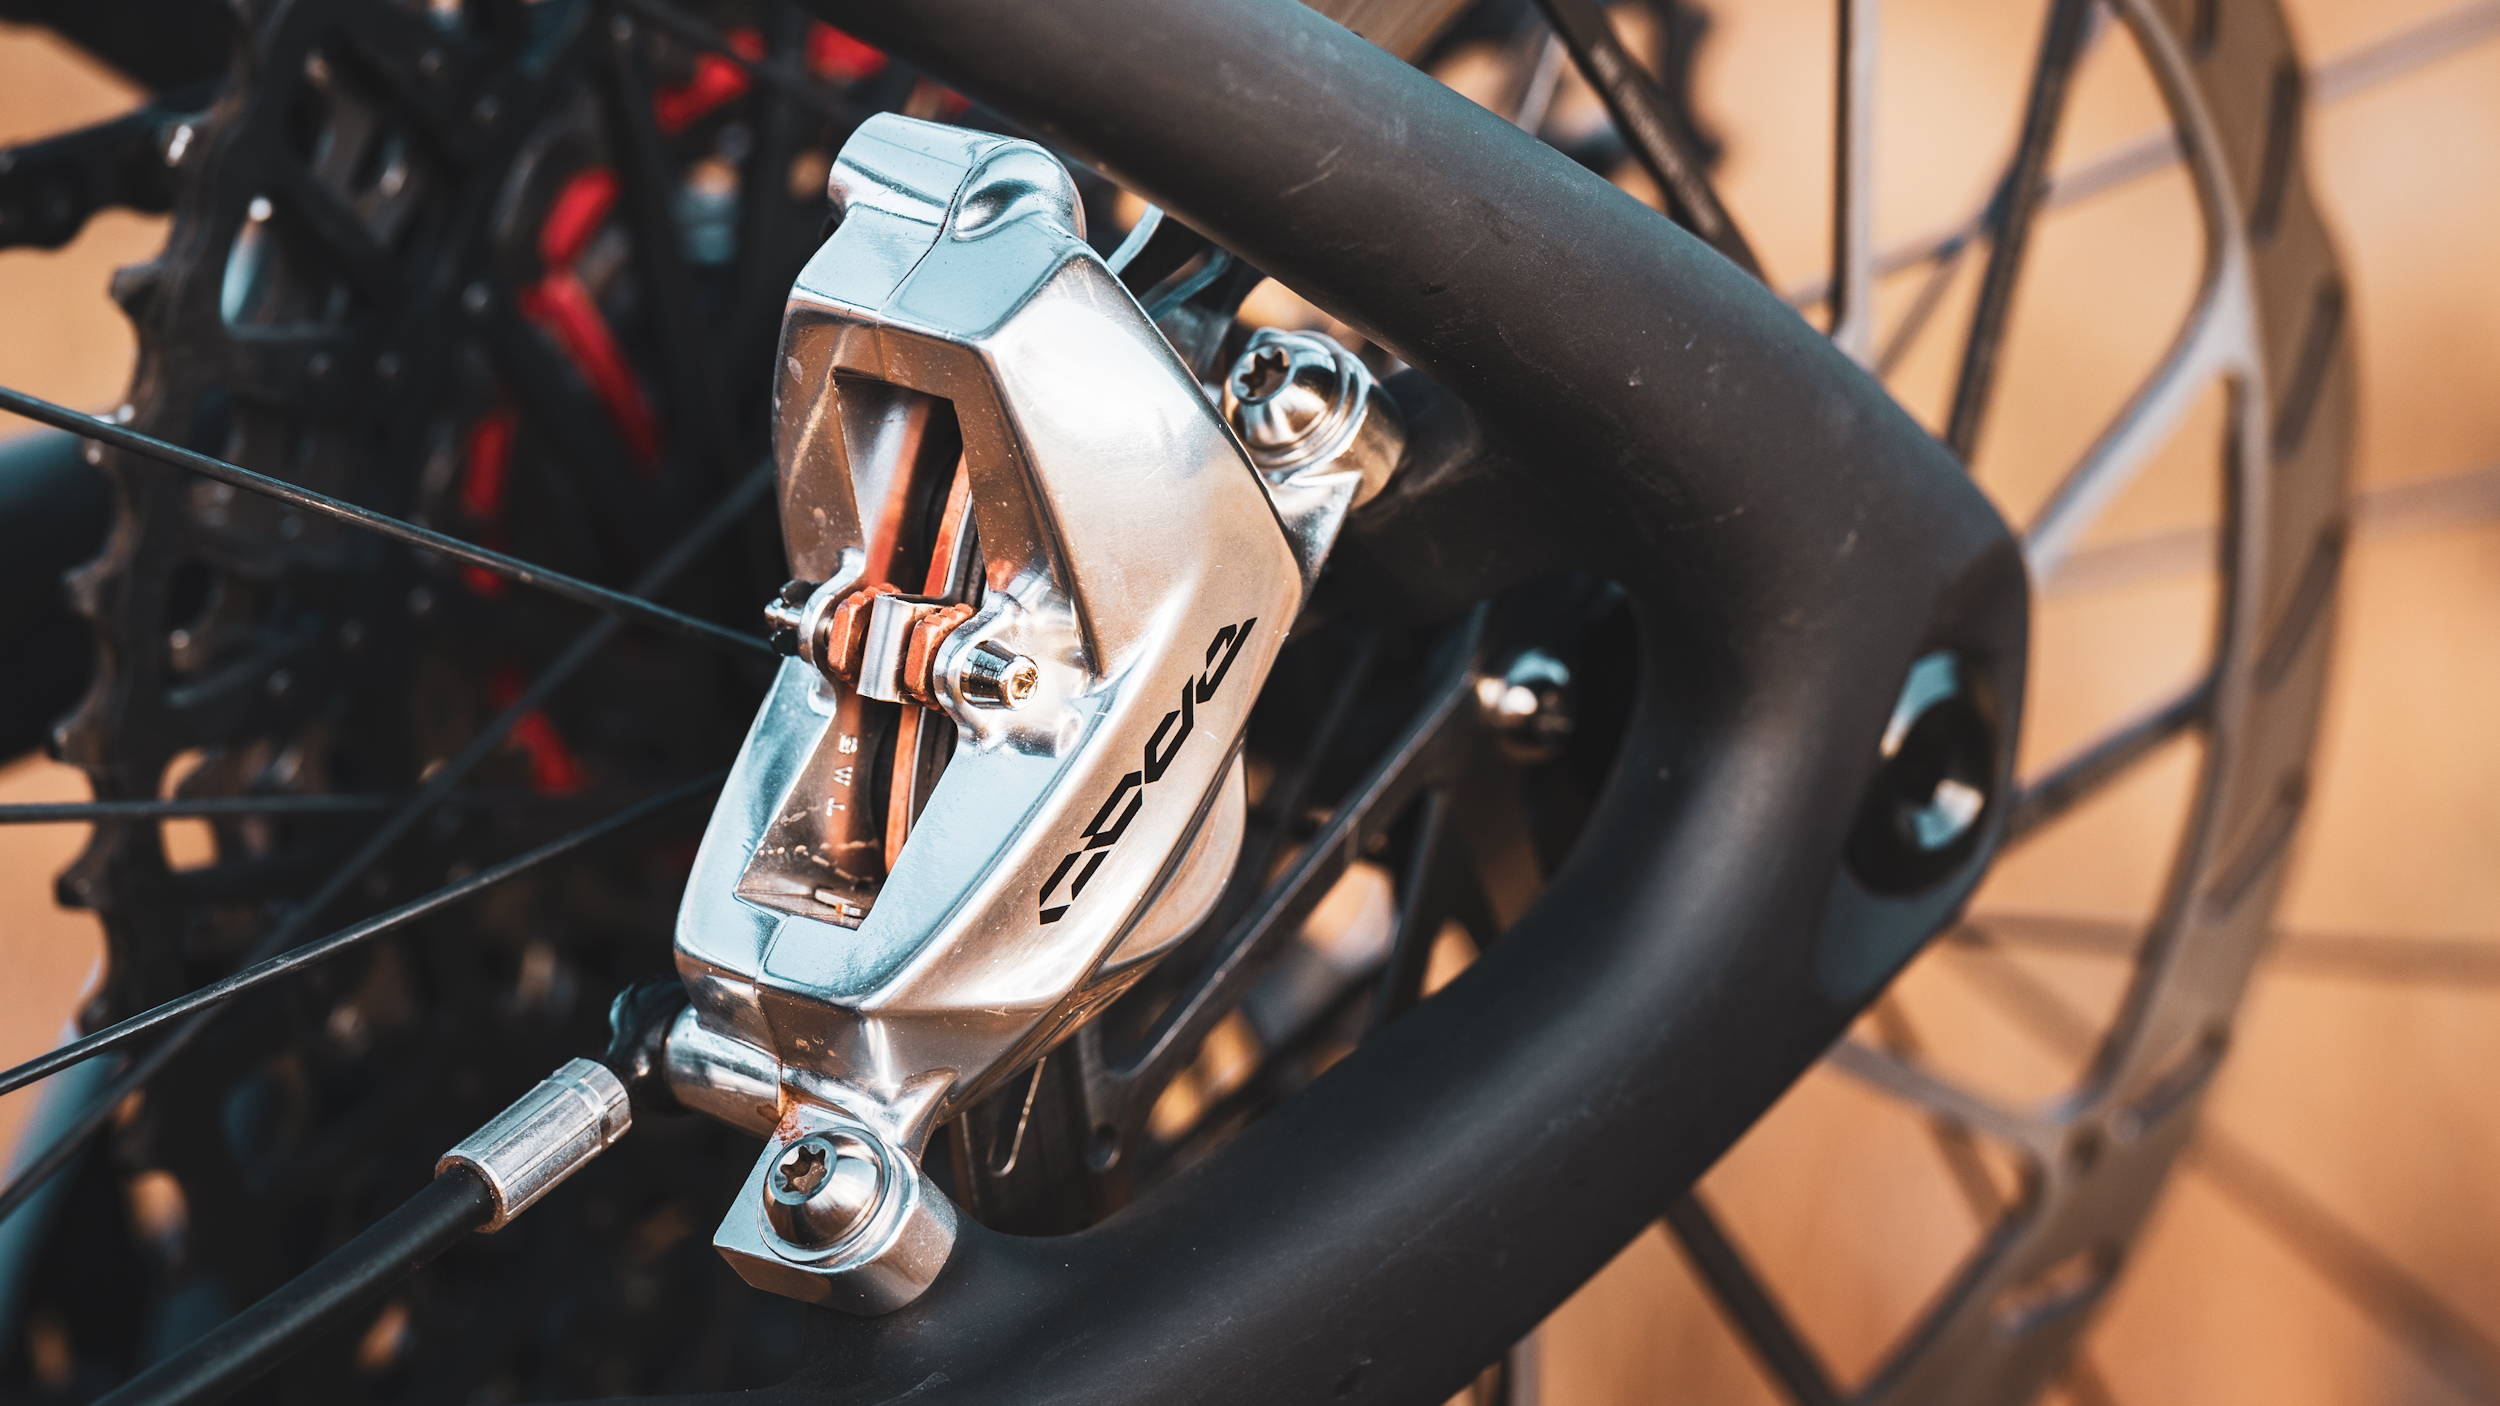 SRAM Code Stealth Ultimate Caliper mounted on rear end of Specialized Stumpjumper with HS2 rotor